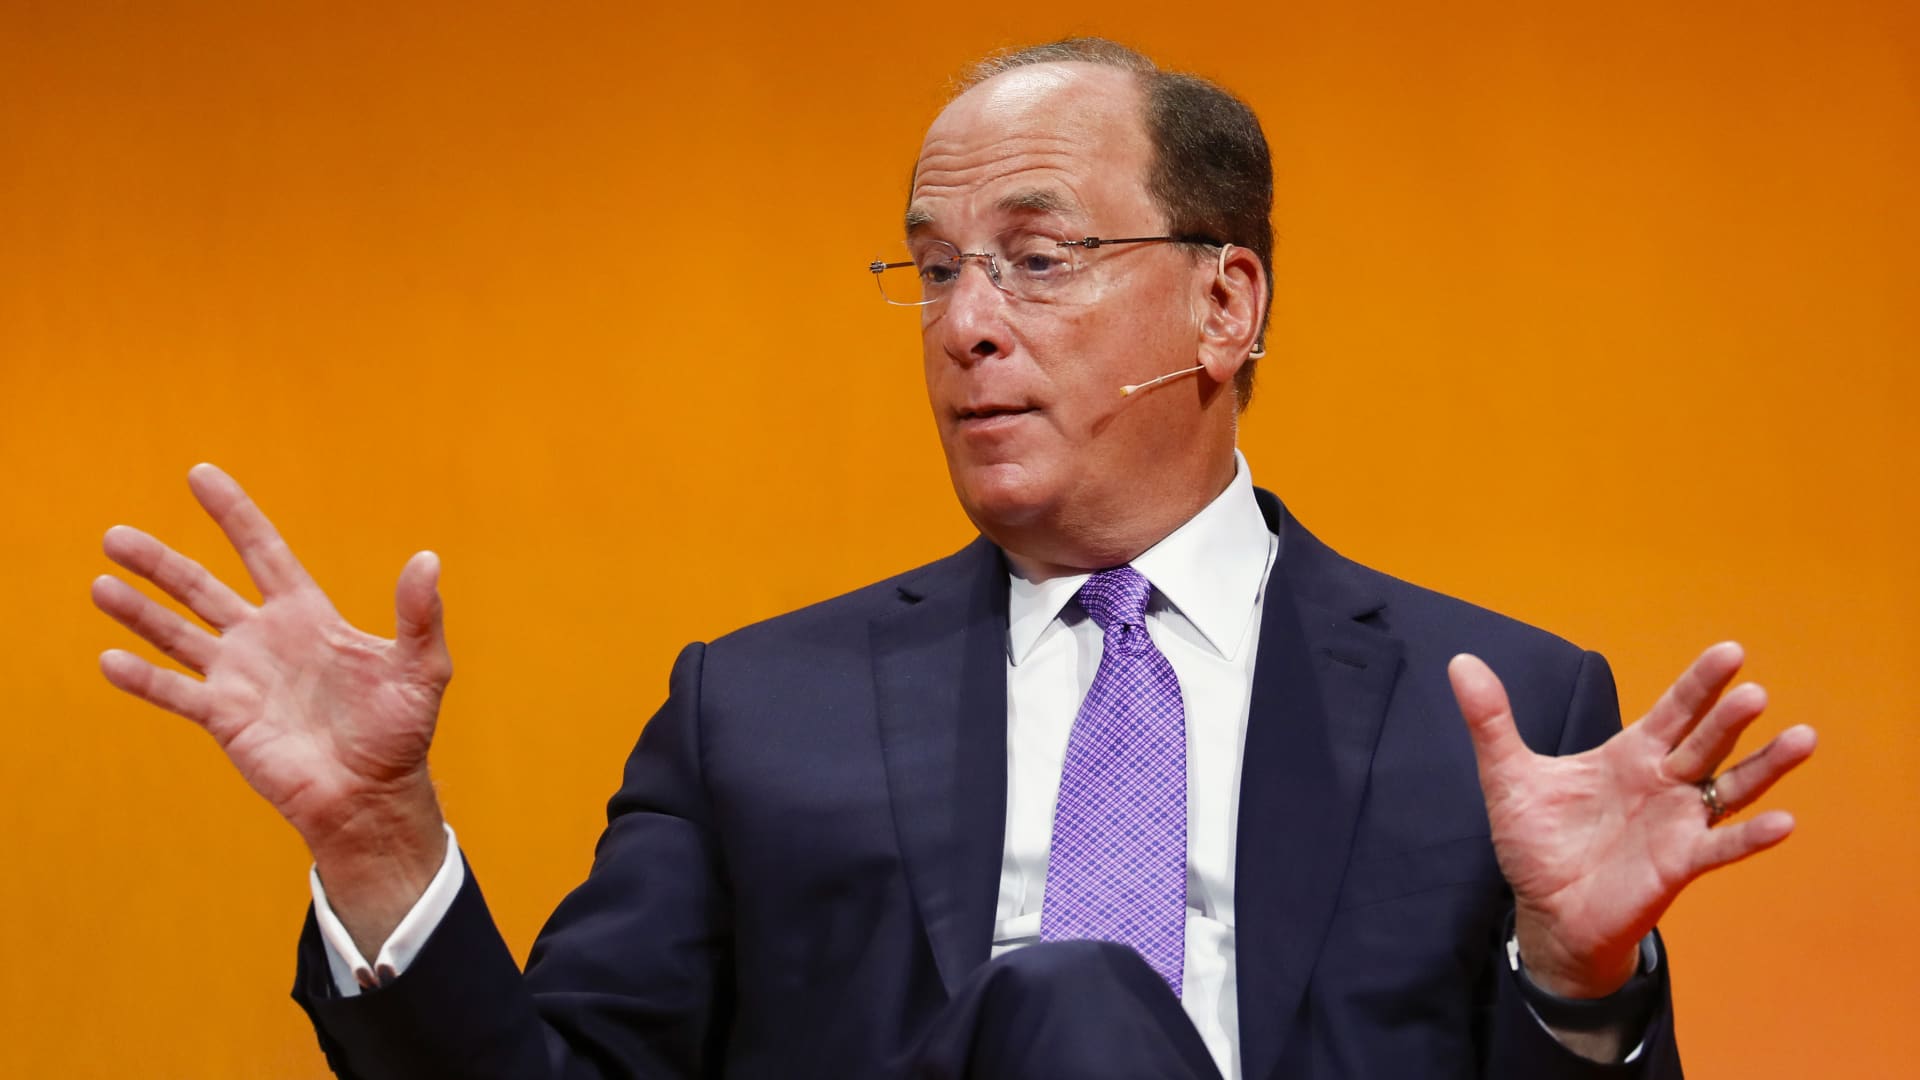 BlackRock launches a private trust to give clients exposure to spot bitcoin